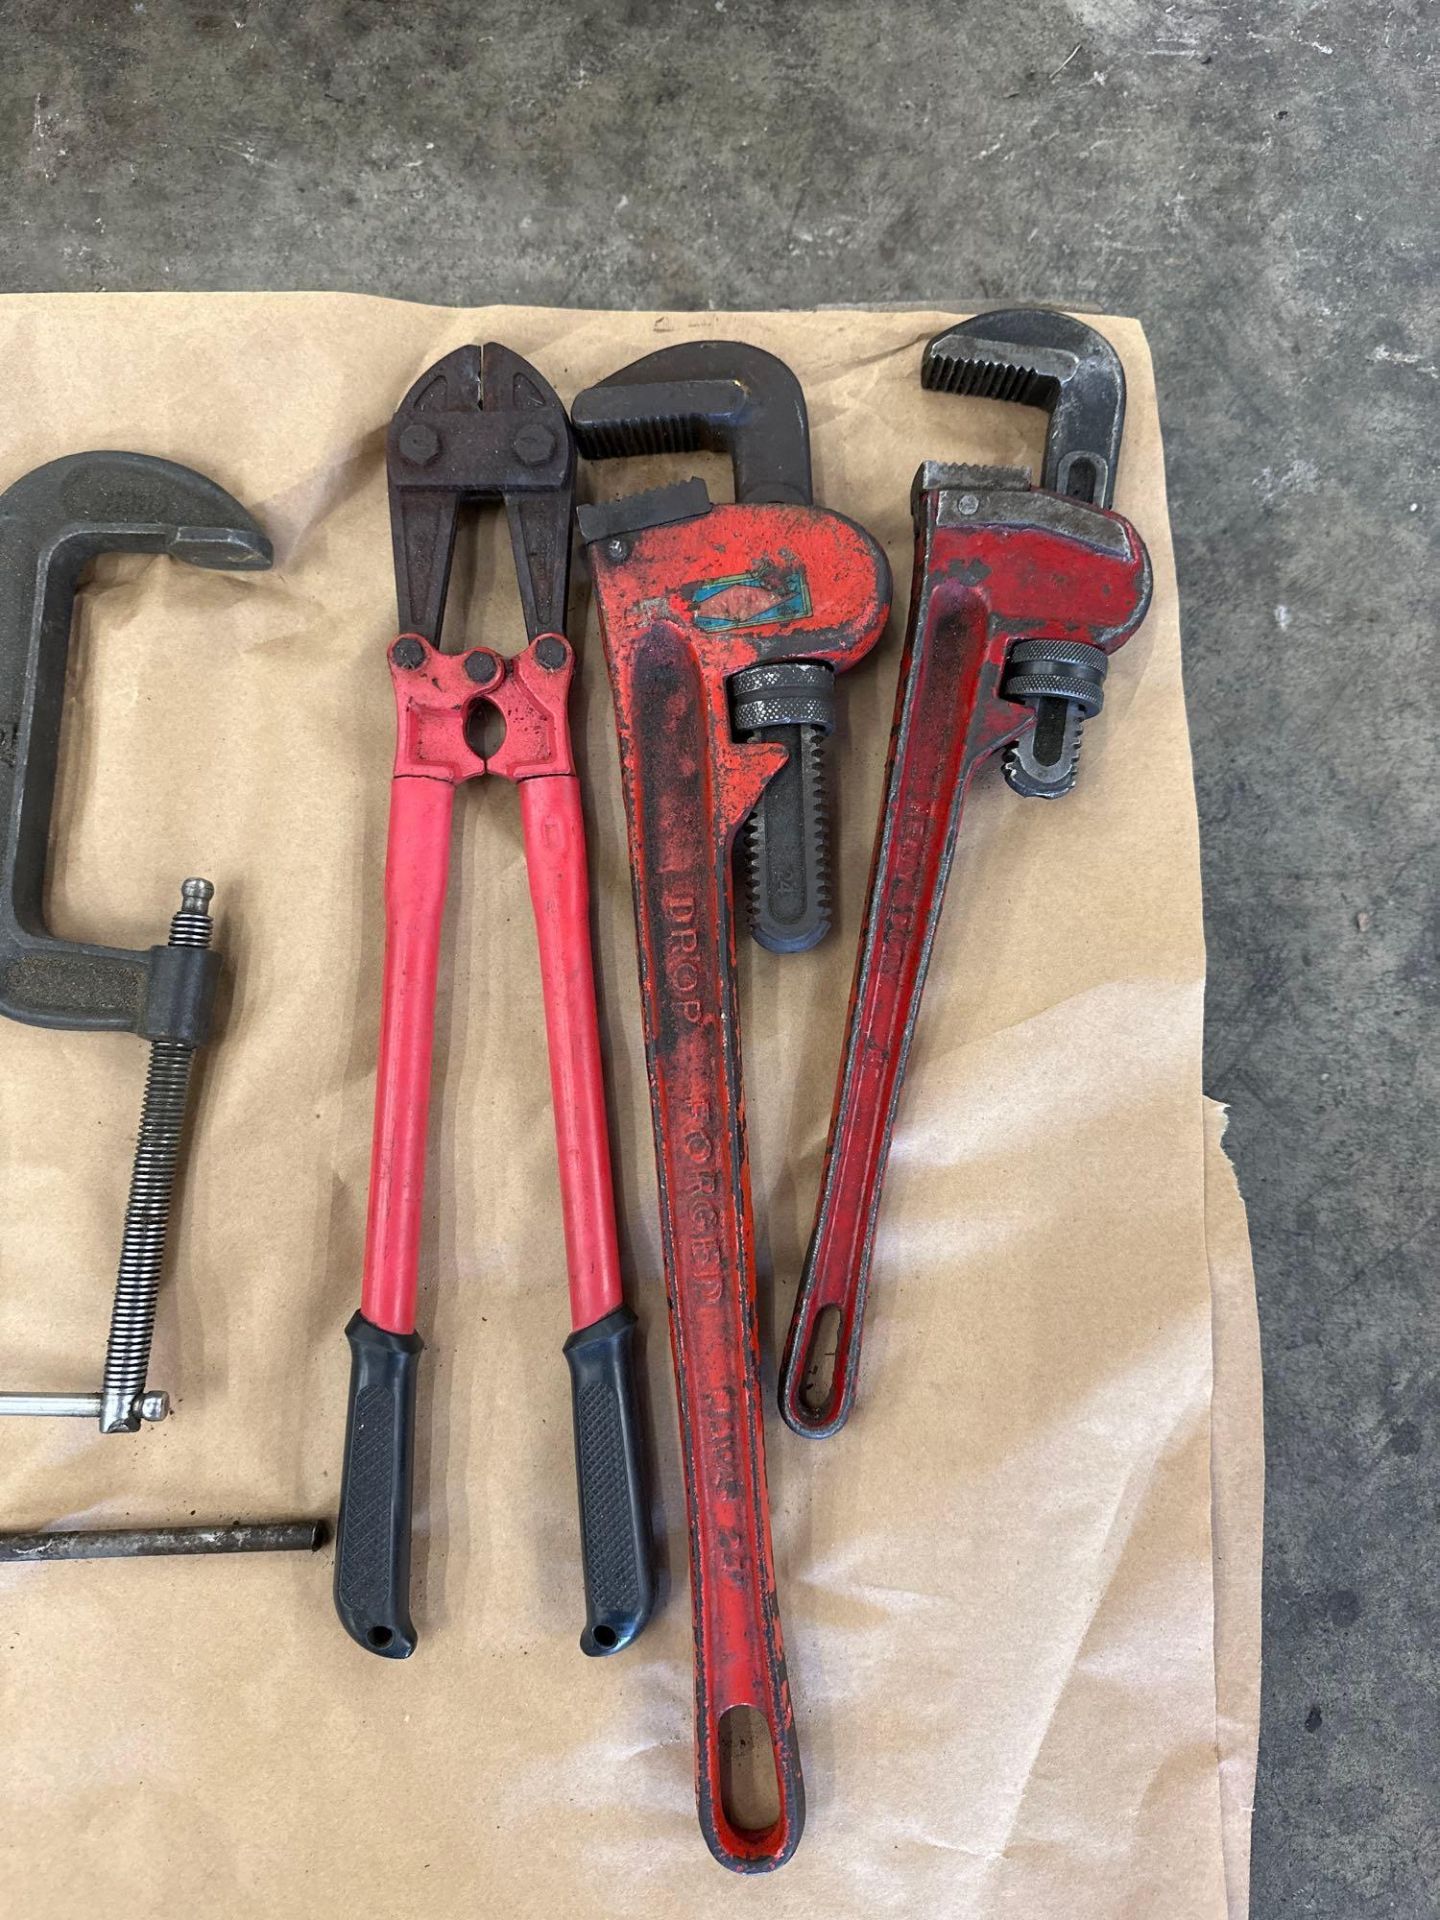 Lot of C - Clamps and Wrenches